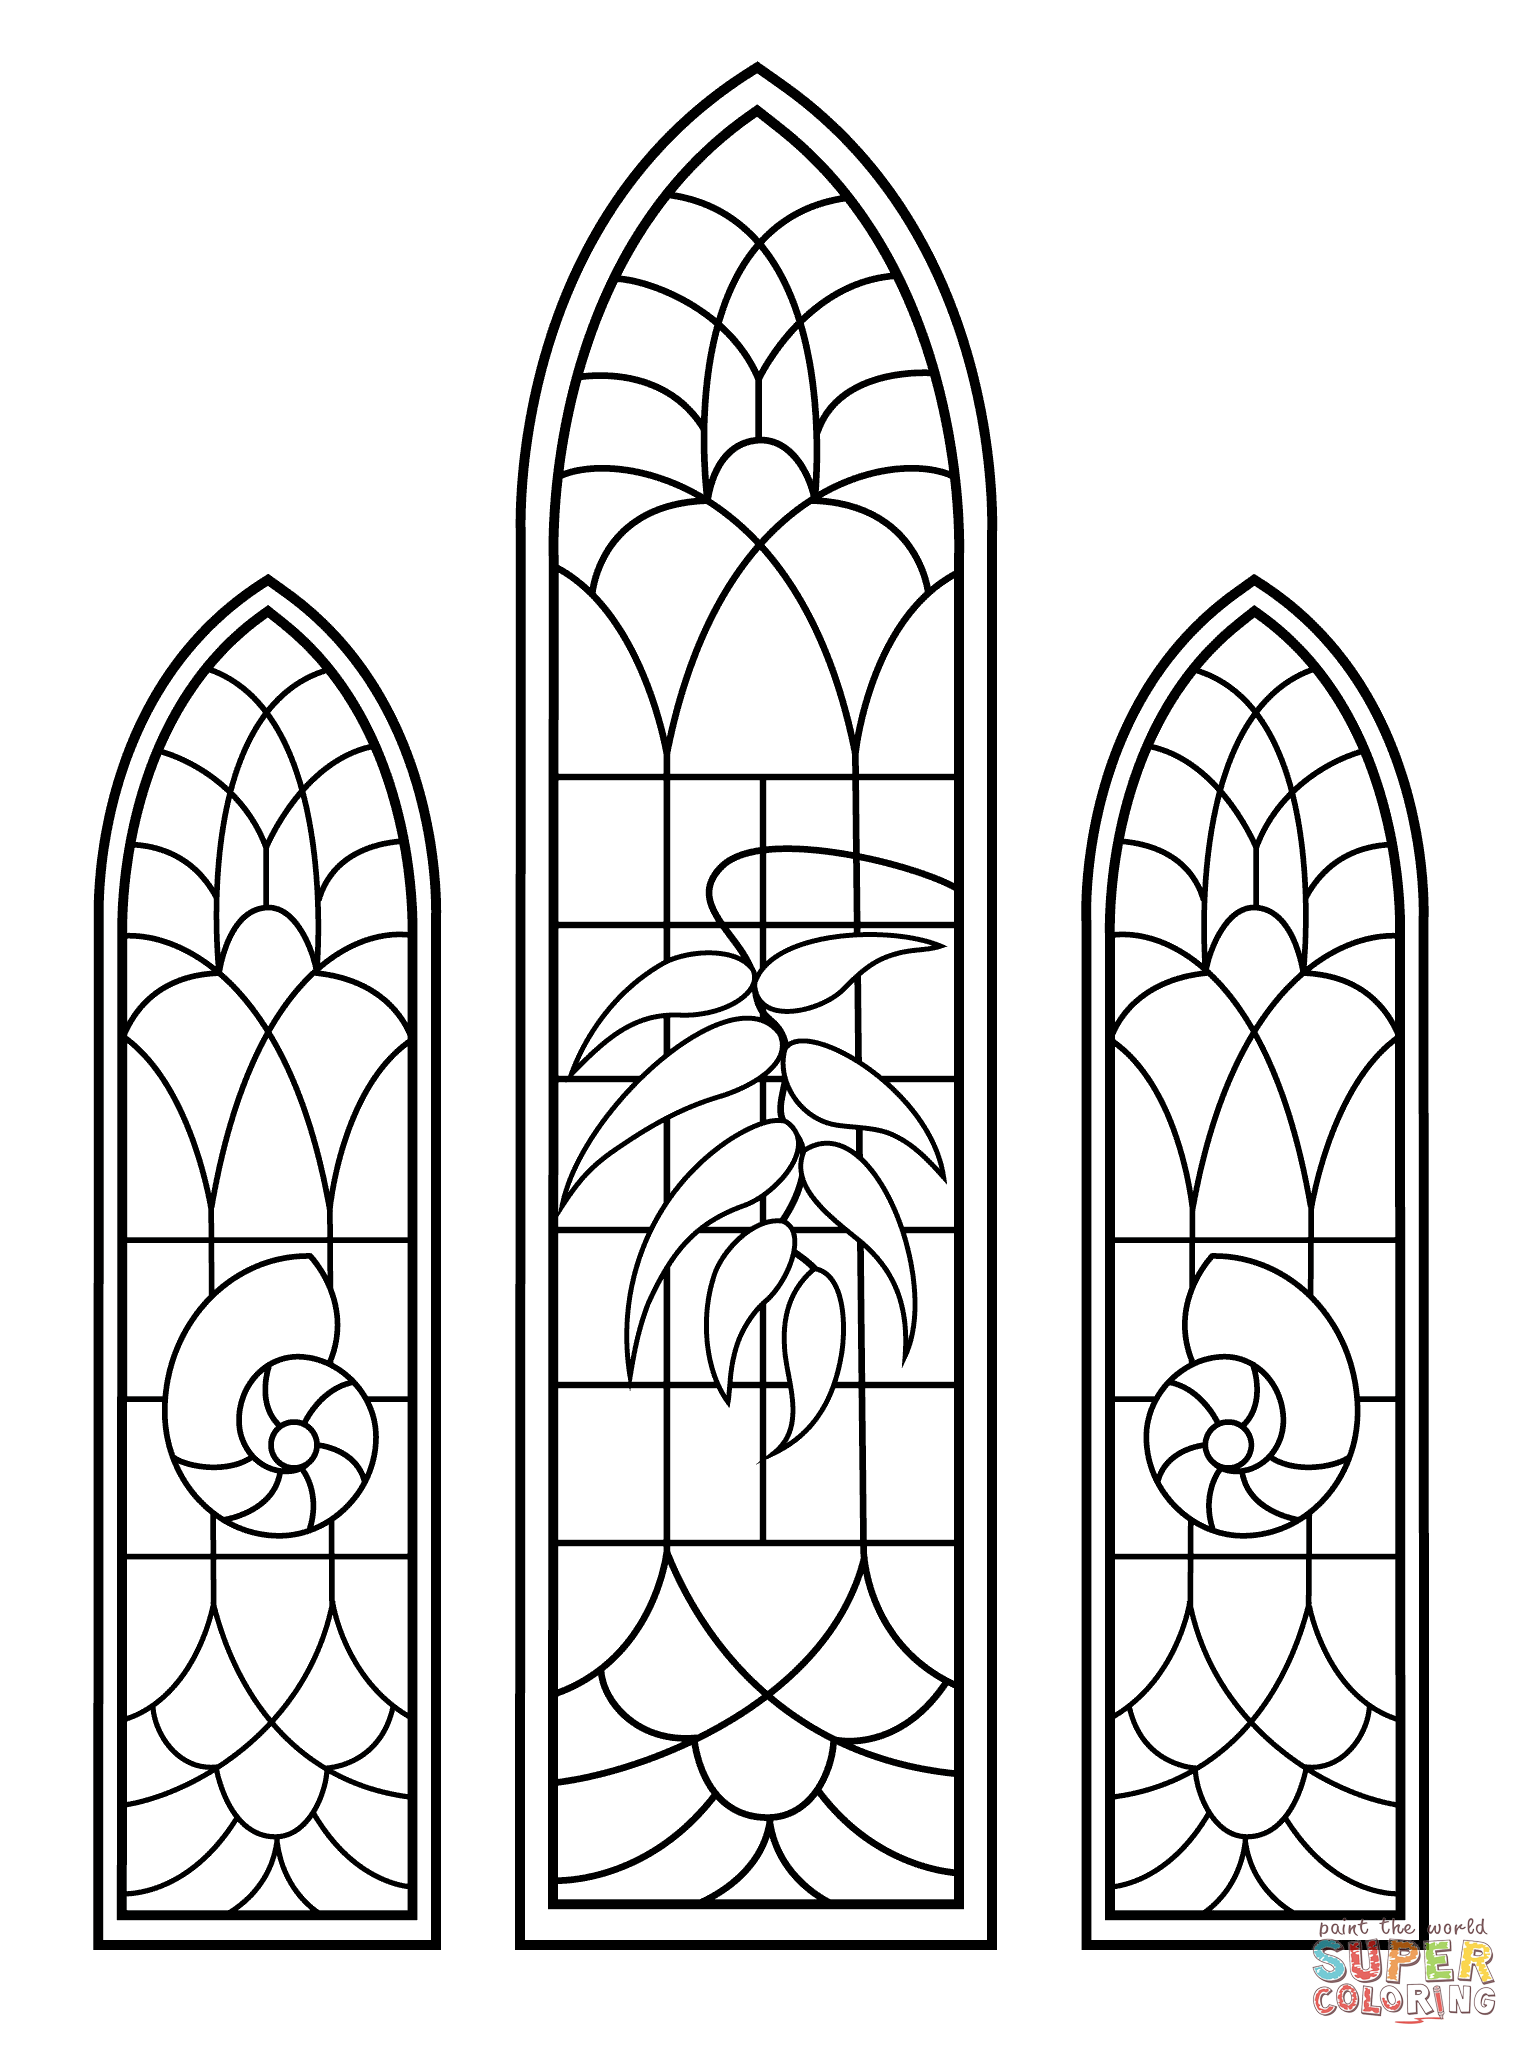 Stained Glass Windows From Wedding Chapel Coloring Page Free Printable Coloring Pages